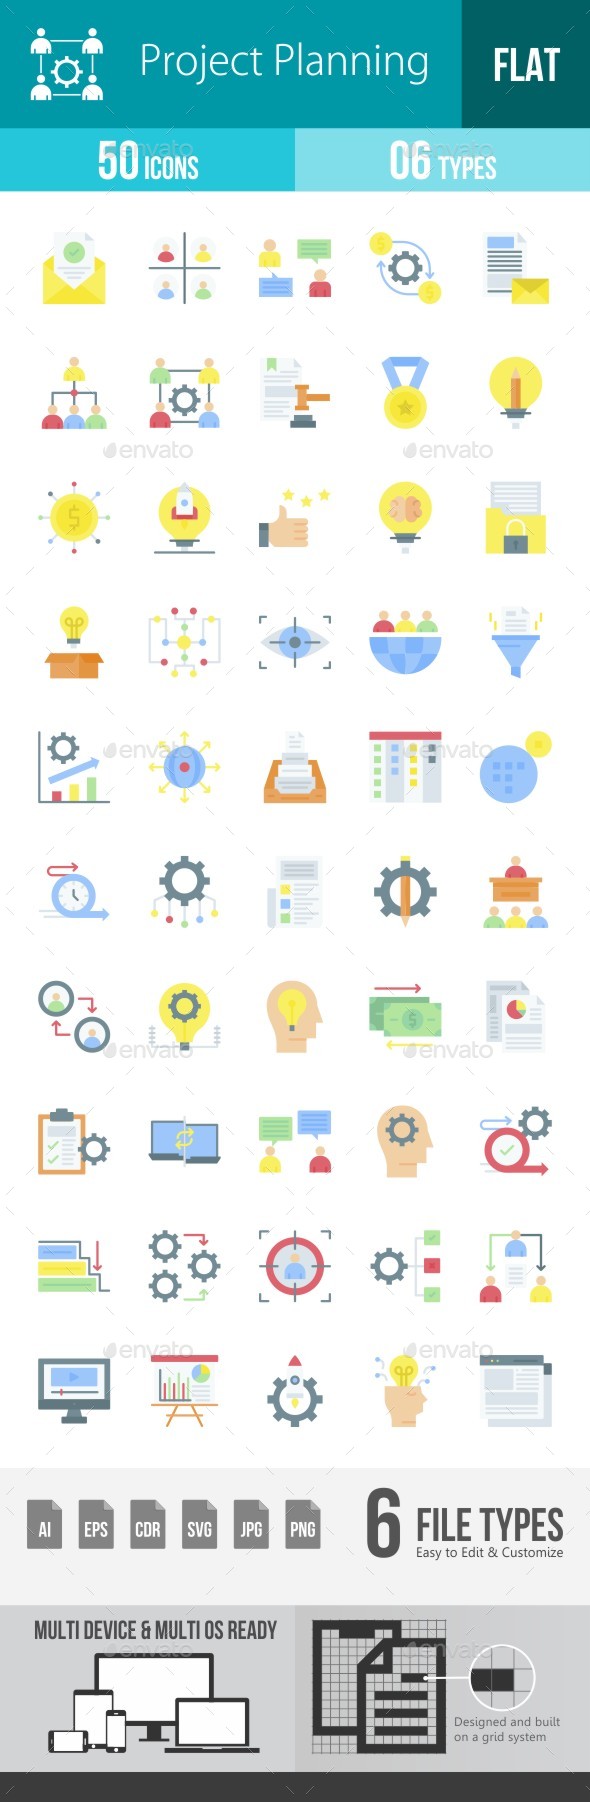 [DOWNLOAD]Project Planning Flat Multicolor Icons